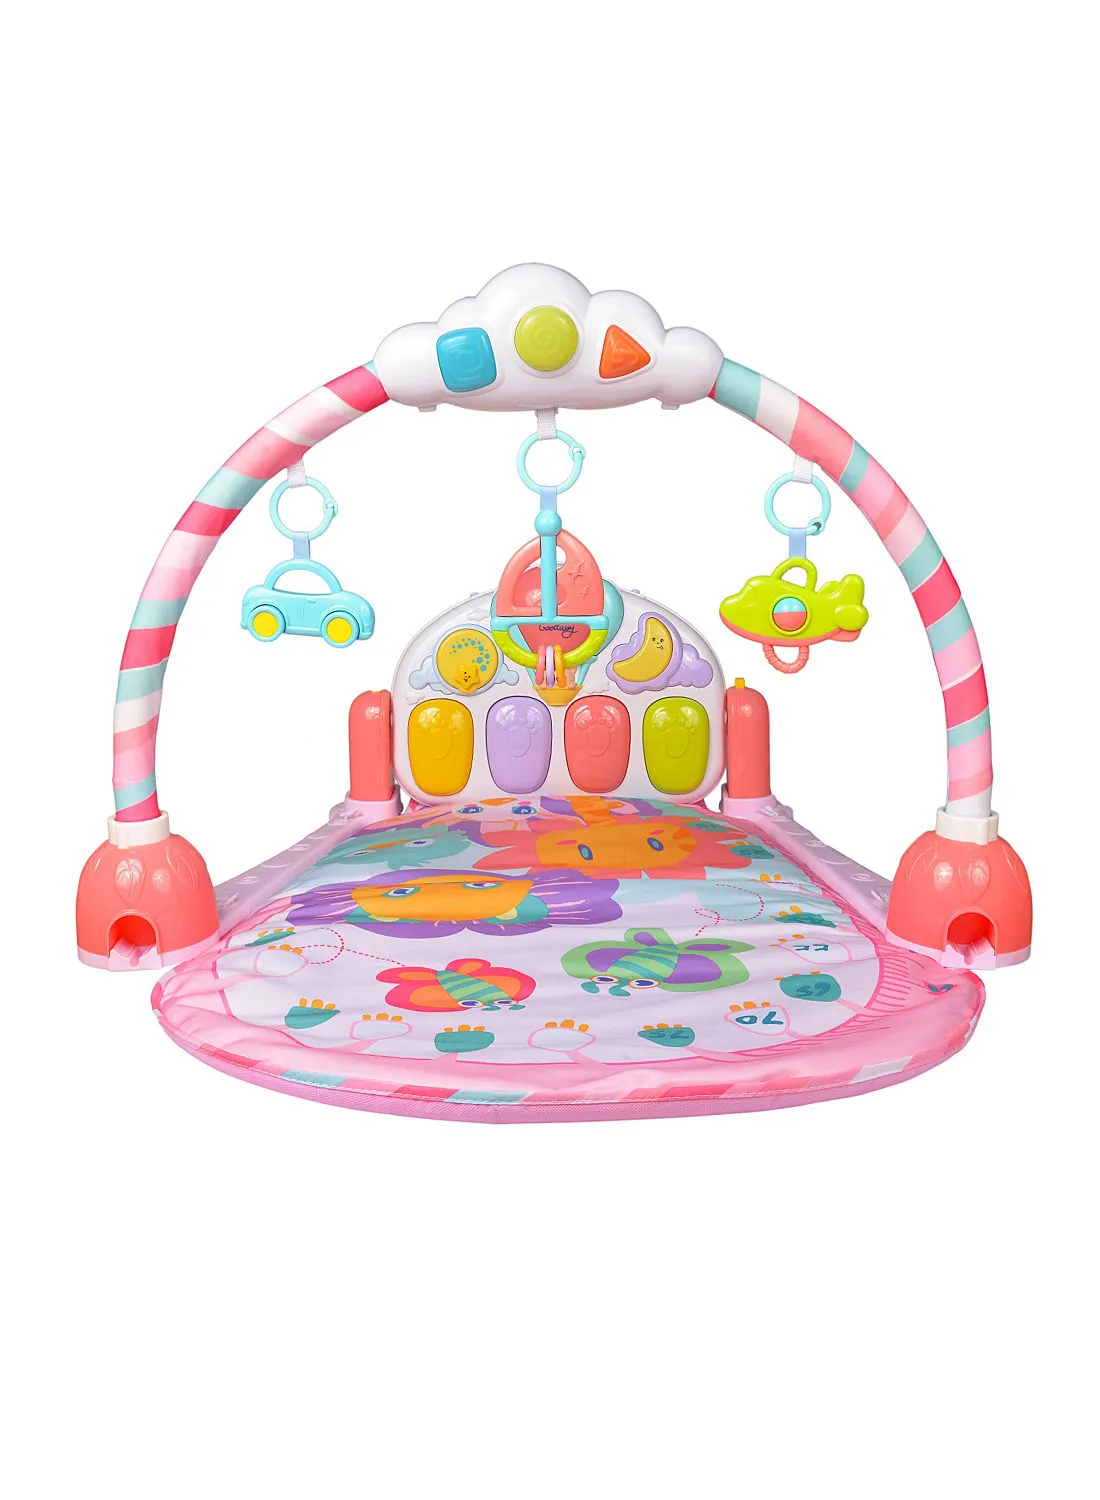 Goodway Baby Play Gym Mat